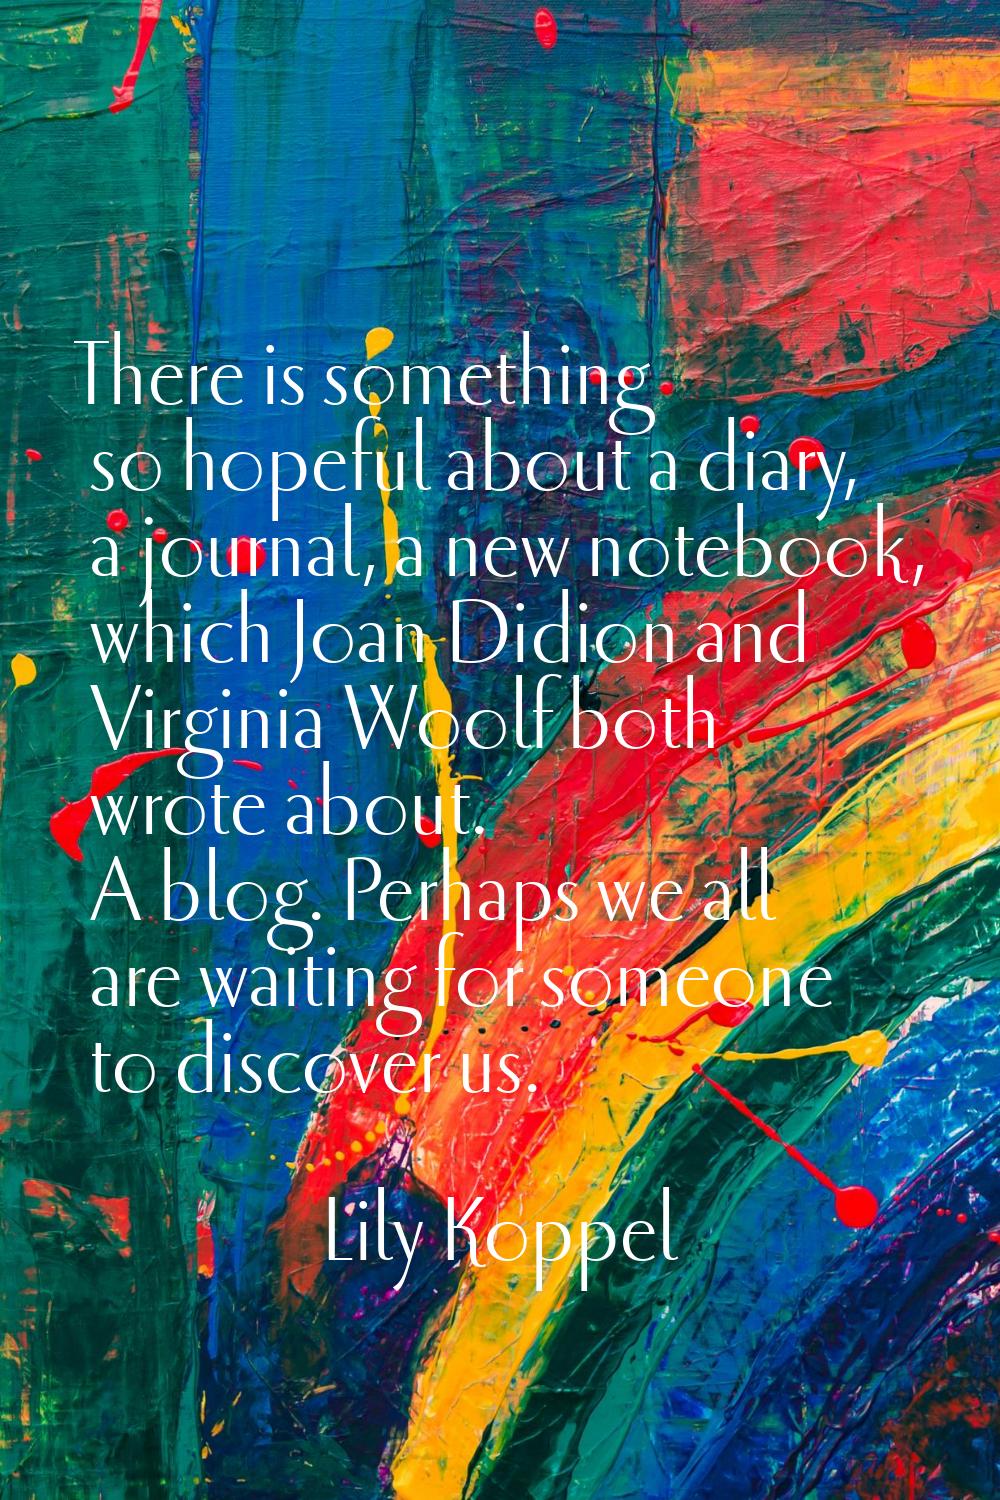 There is something so hopeful about a diary, a journal, a new notebook, which Joan Didion and Virgi